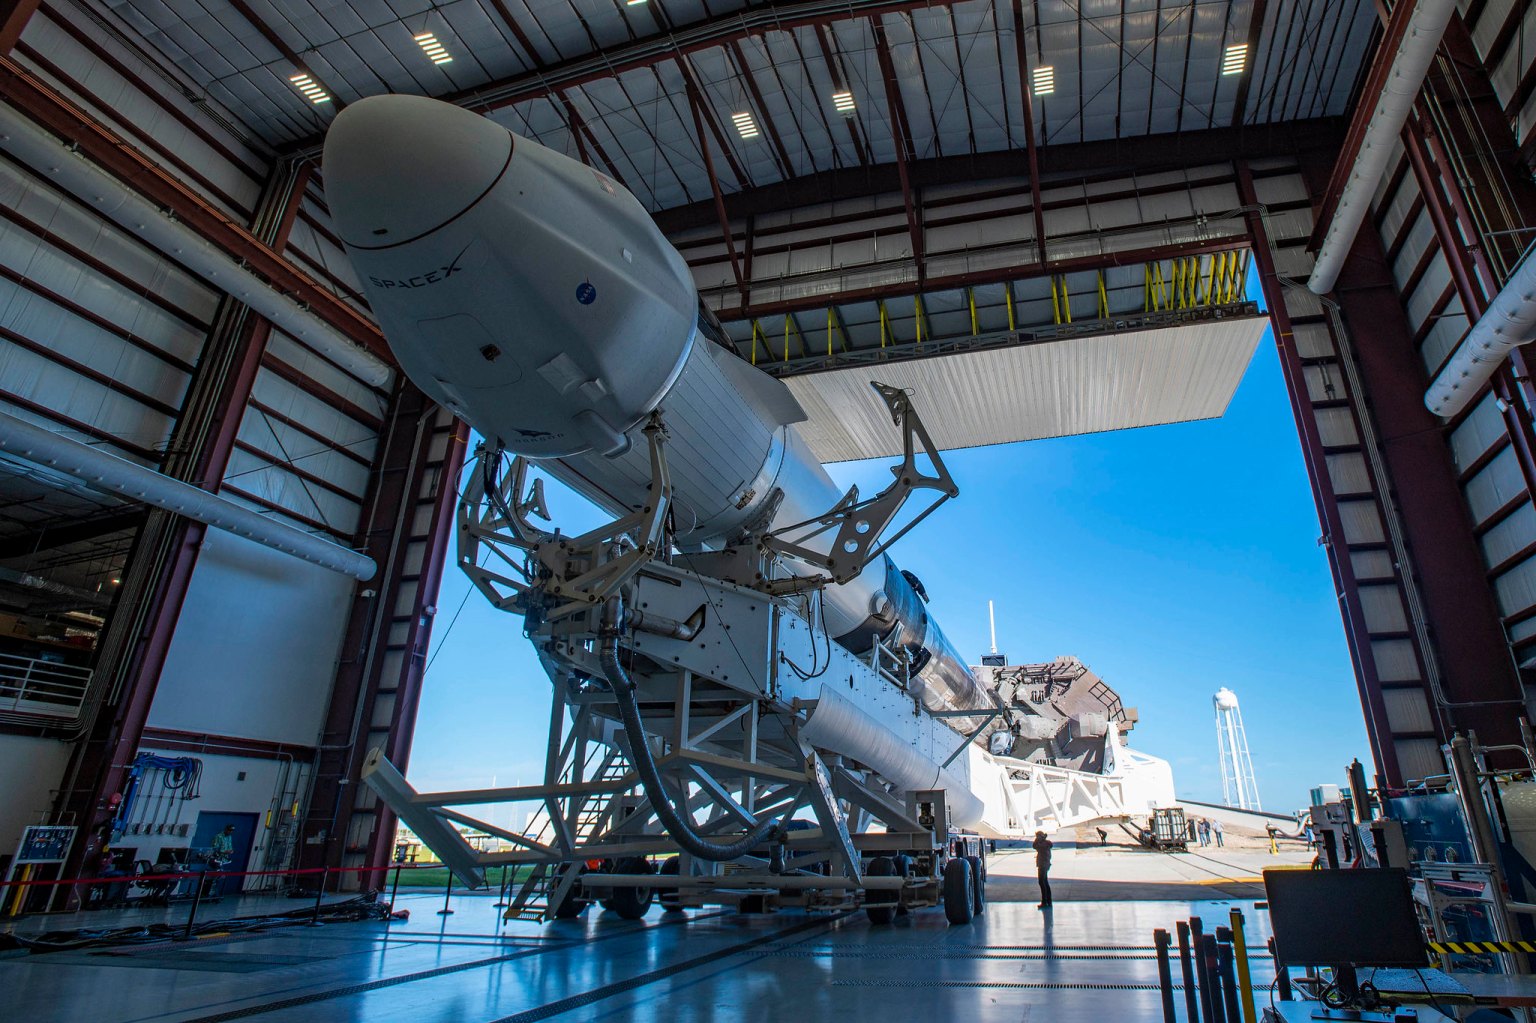 A closeup view of SpaceX cargo Dragon spacecraft inside the hangar at Kennedy Space Center in Florida.